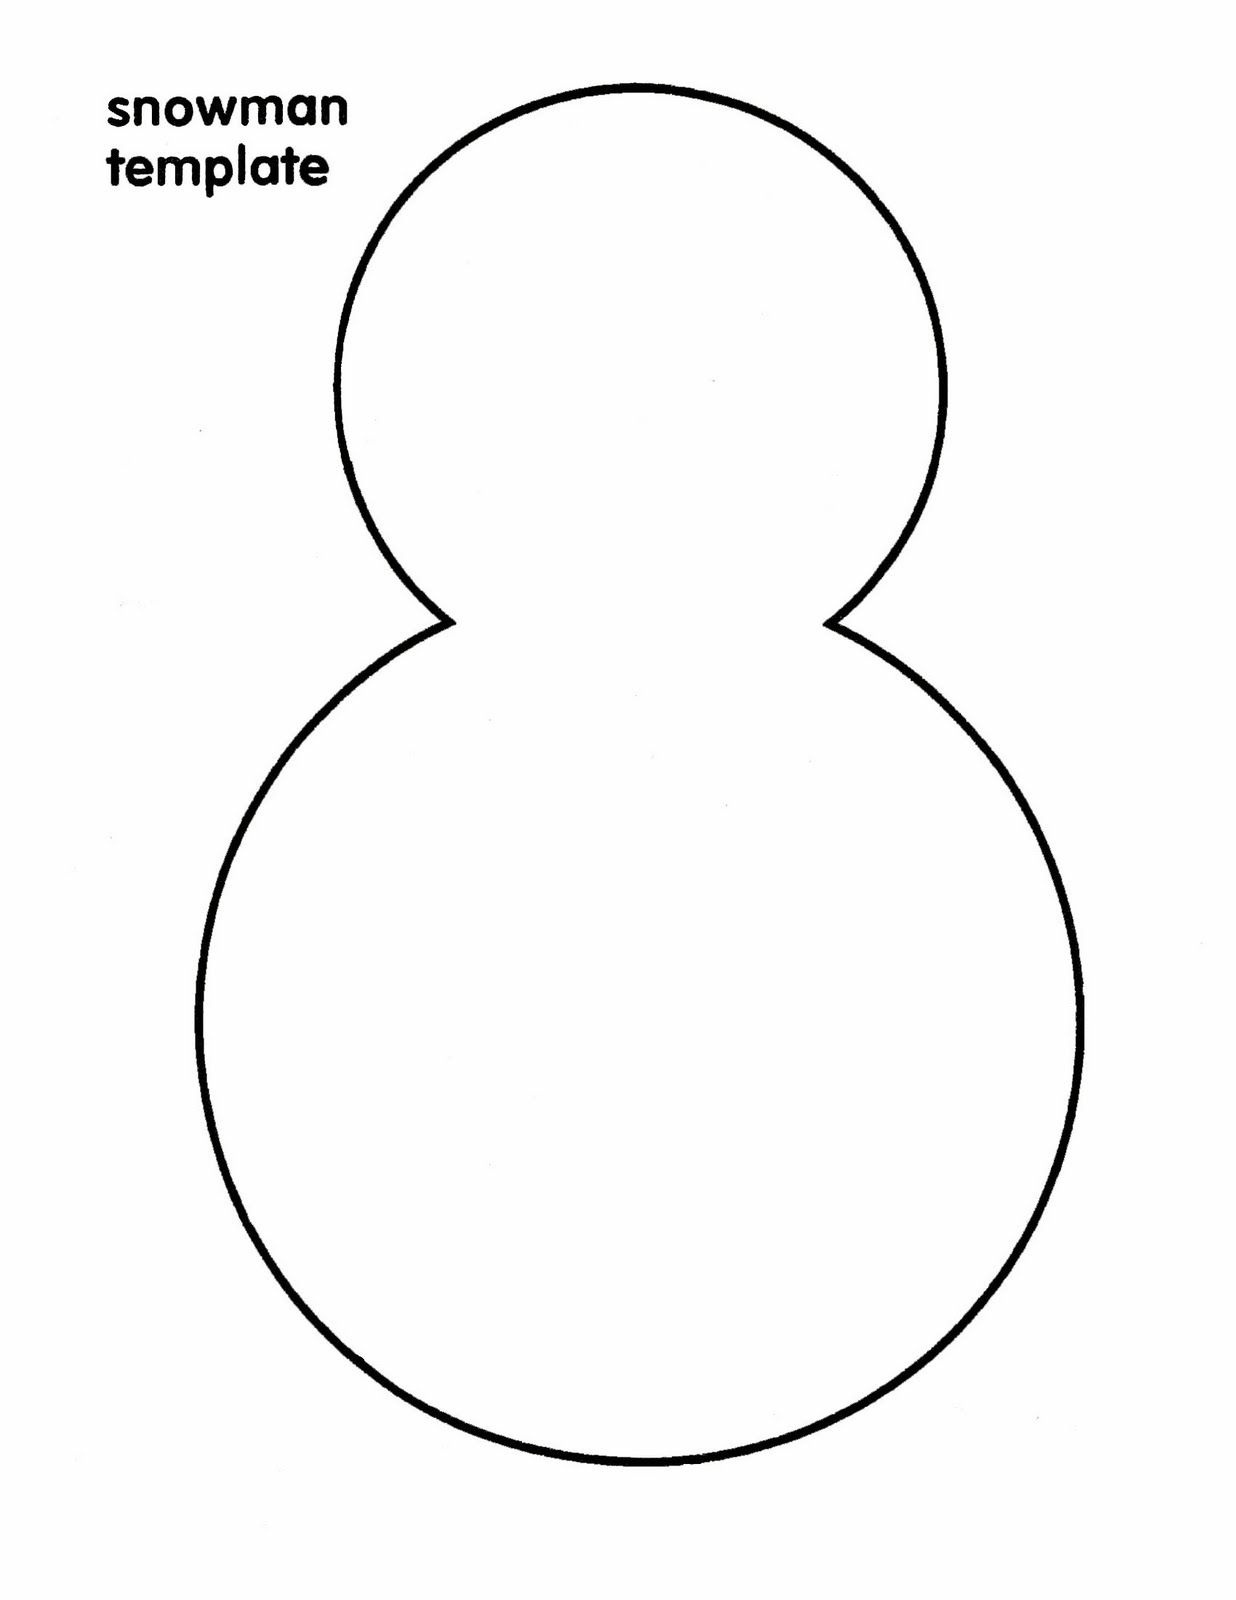 Snowman Pictures To Color To Color They May Enjoy This Printable Free Printable Snowman